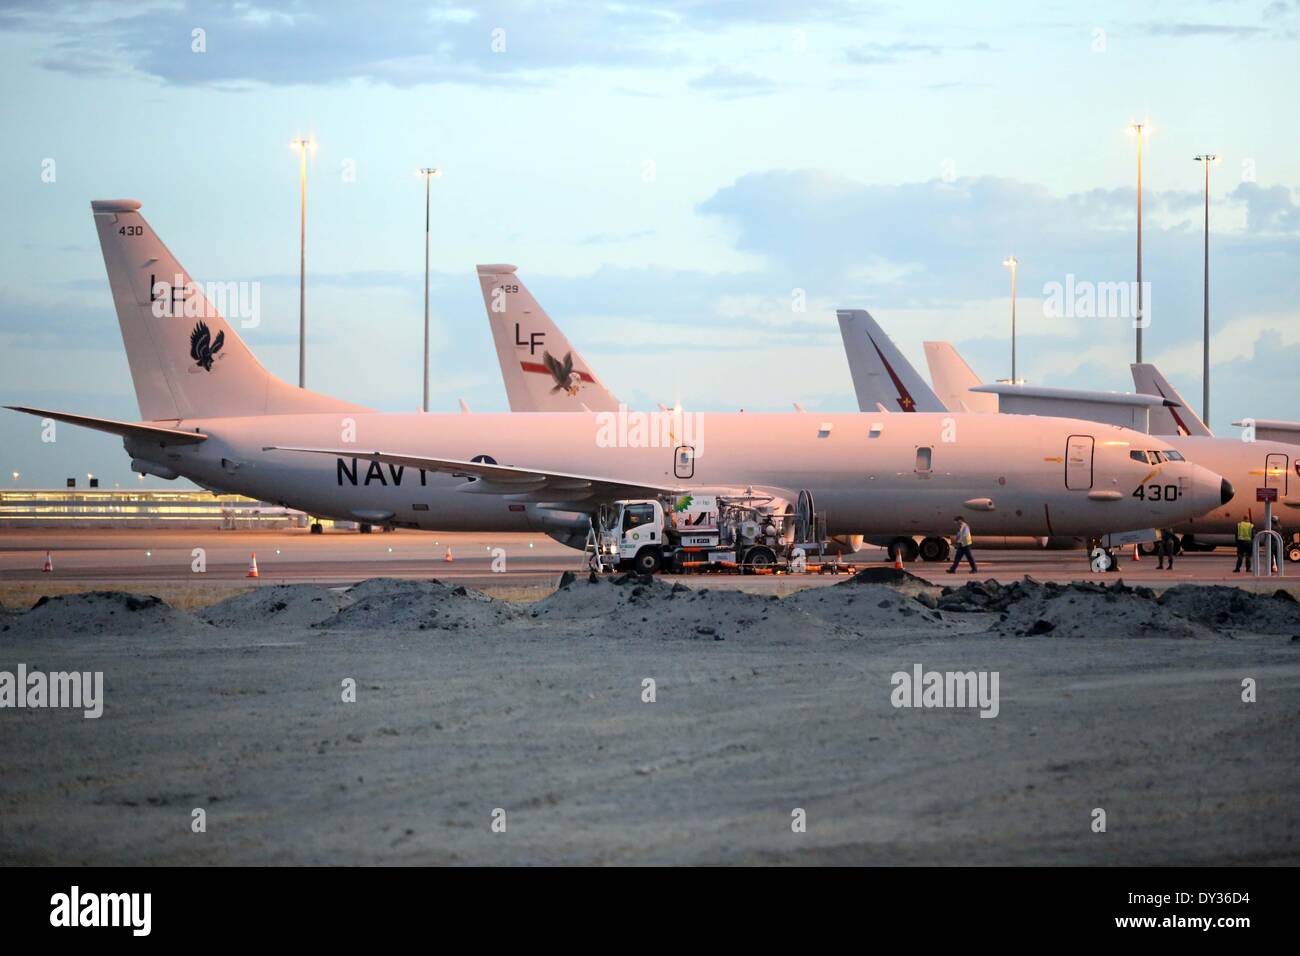 Perth. 5th Apr, 2014. Photo taken on April 5 shows two U.S. Navy plane P-8 Poseidon at Perth International Airport in Australia. U.S. 7th Fleet has sent two P-8 Poseidon patrol aircrafts to help in the search efforts for the missing Malaysia Airlines Flight MH370. © Xu Yanyan/Xinhua/Alamy Live News Stock Photo